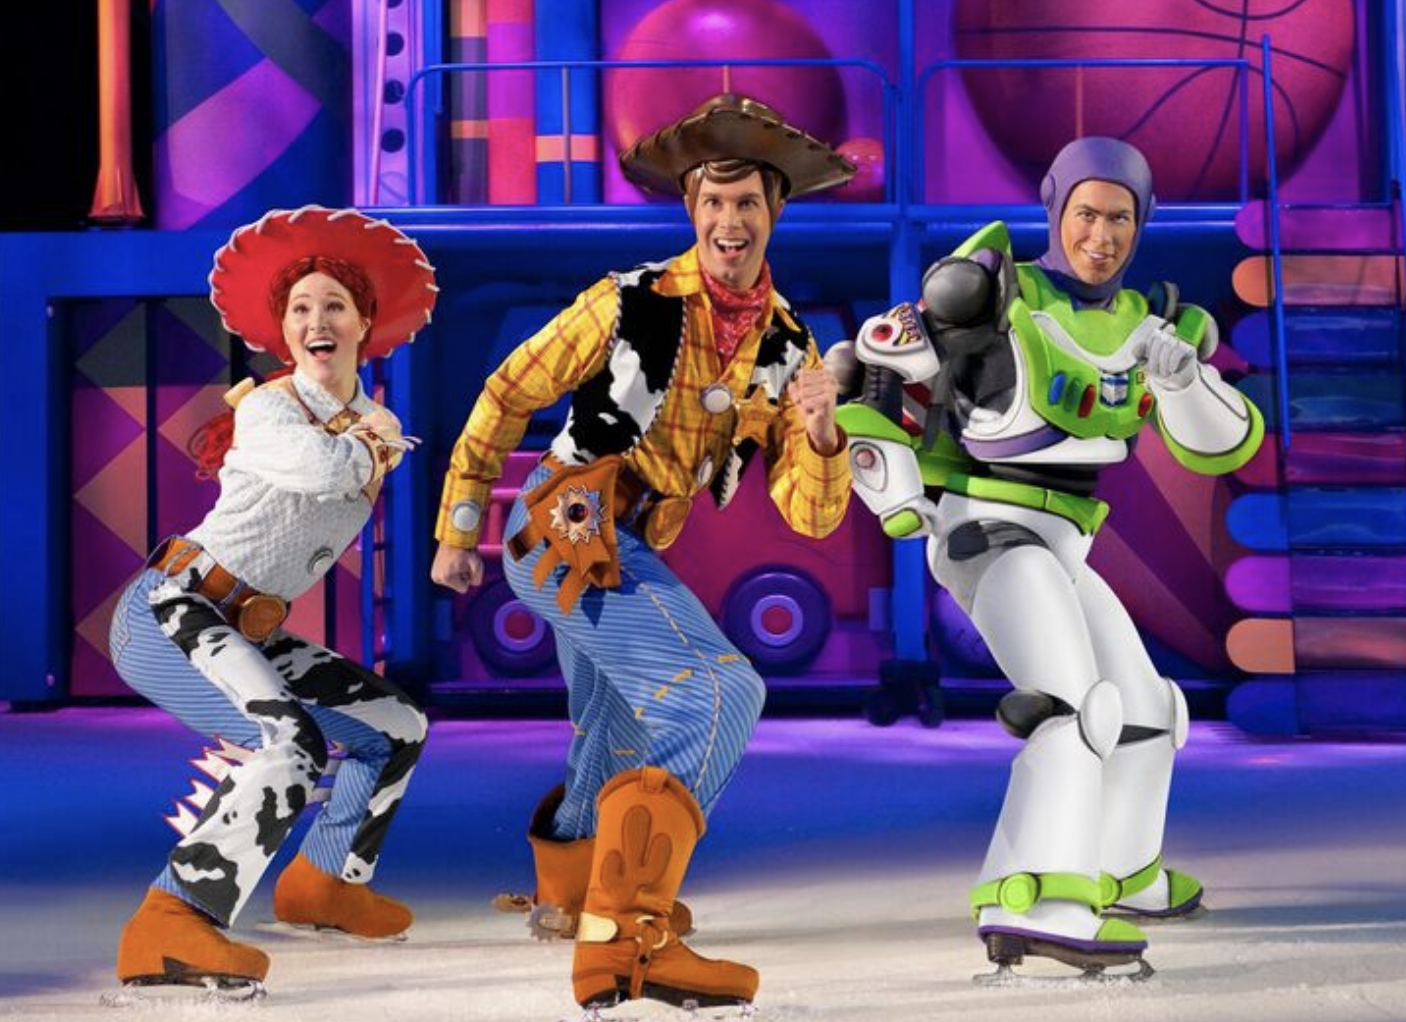 Tickets and information for Disney On Ice Malaysia